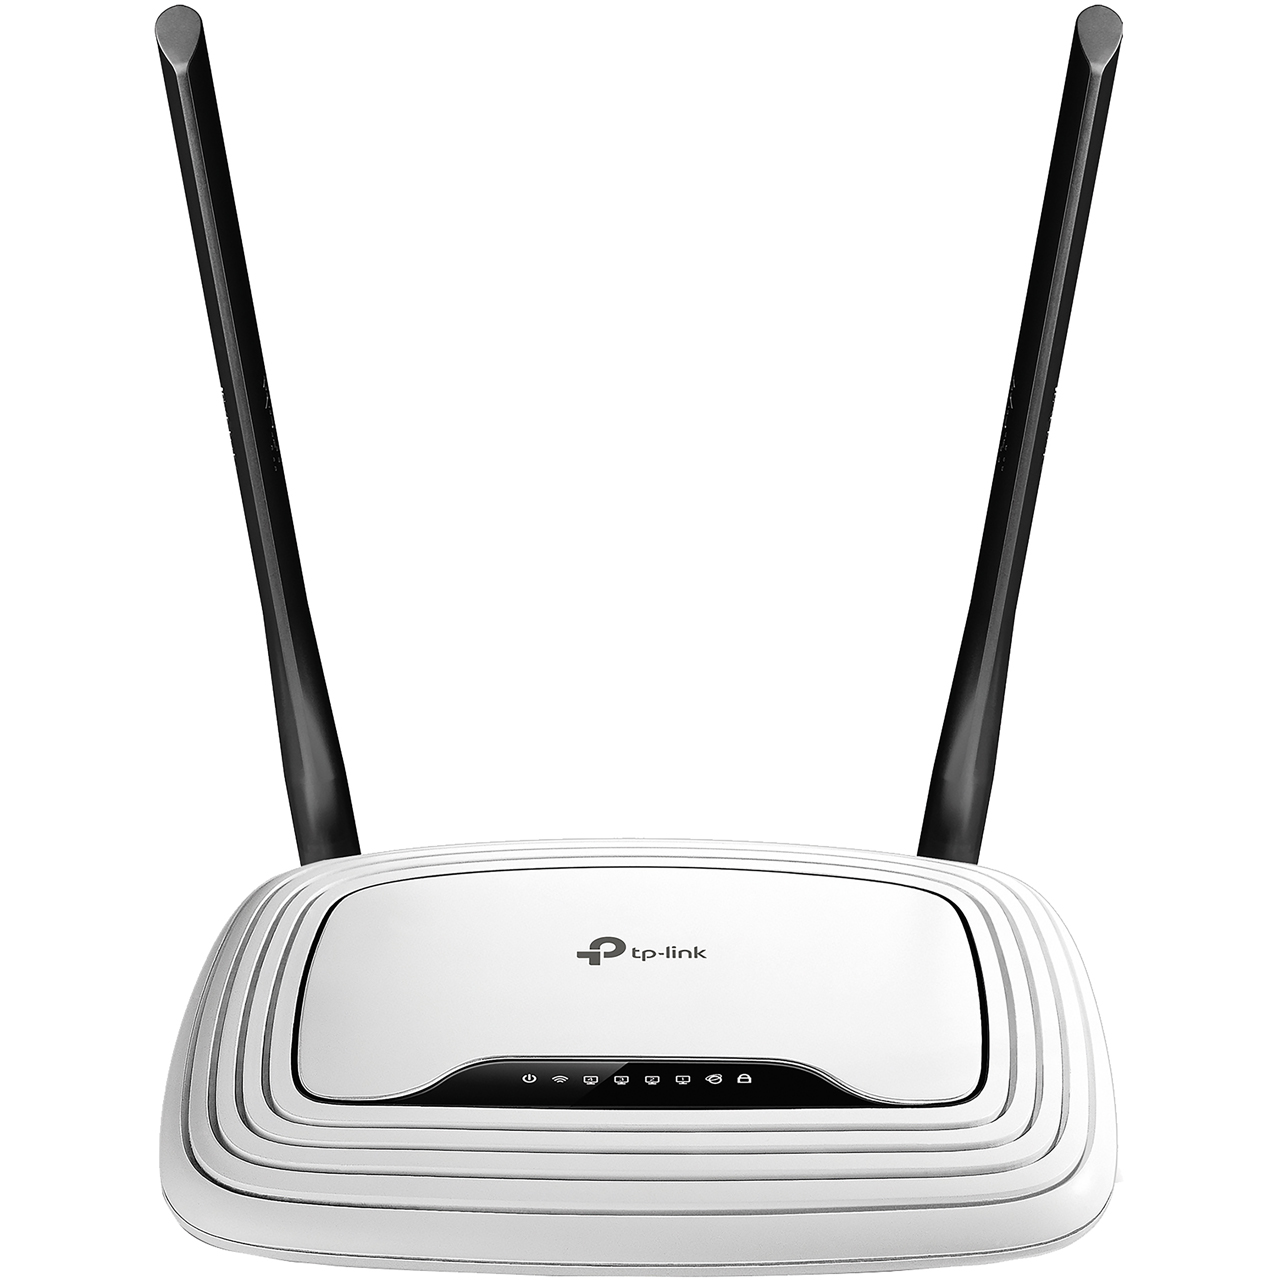 TP-Link TL-WR841N Single Band 300 Gaming Wireless Router Review